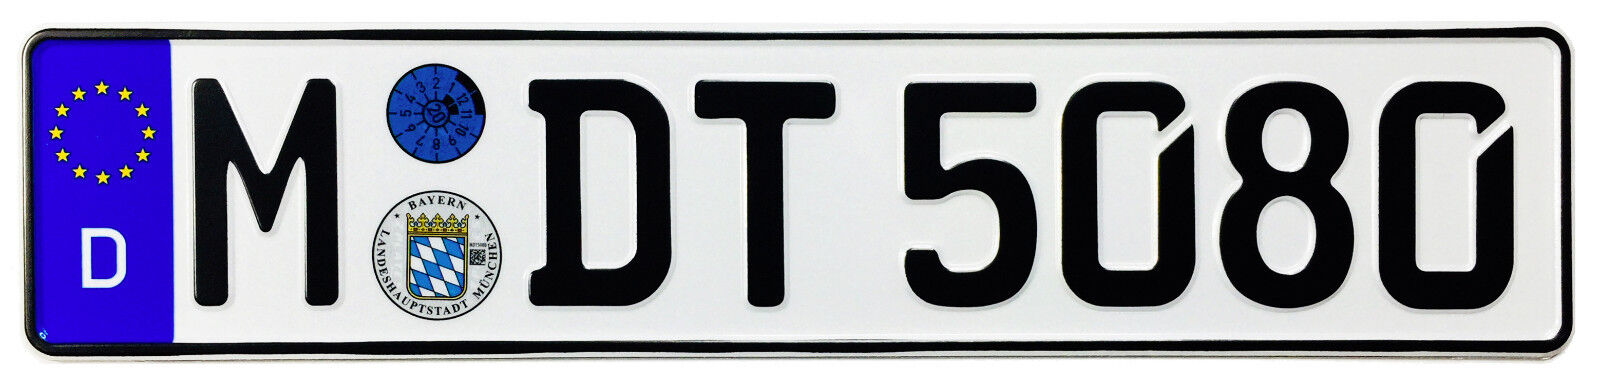 BMW Munich Rear German License Plate by Z Plates wtih Unique Number NEW